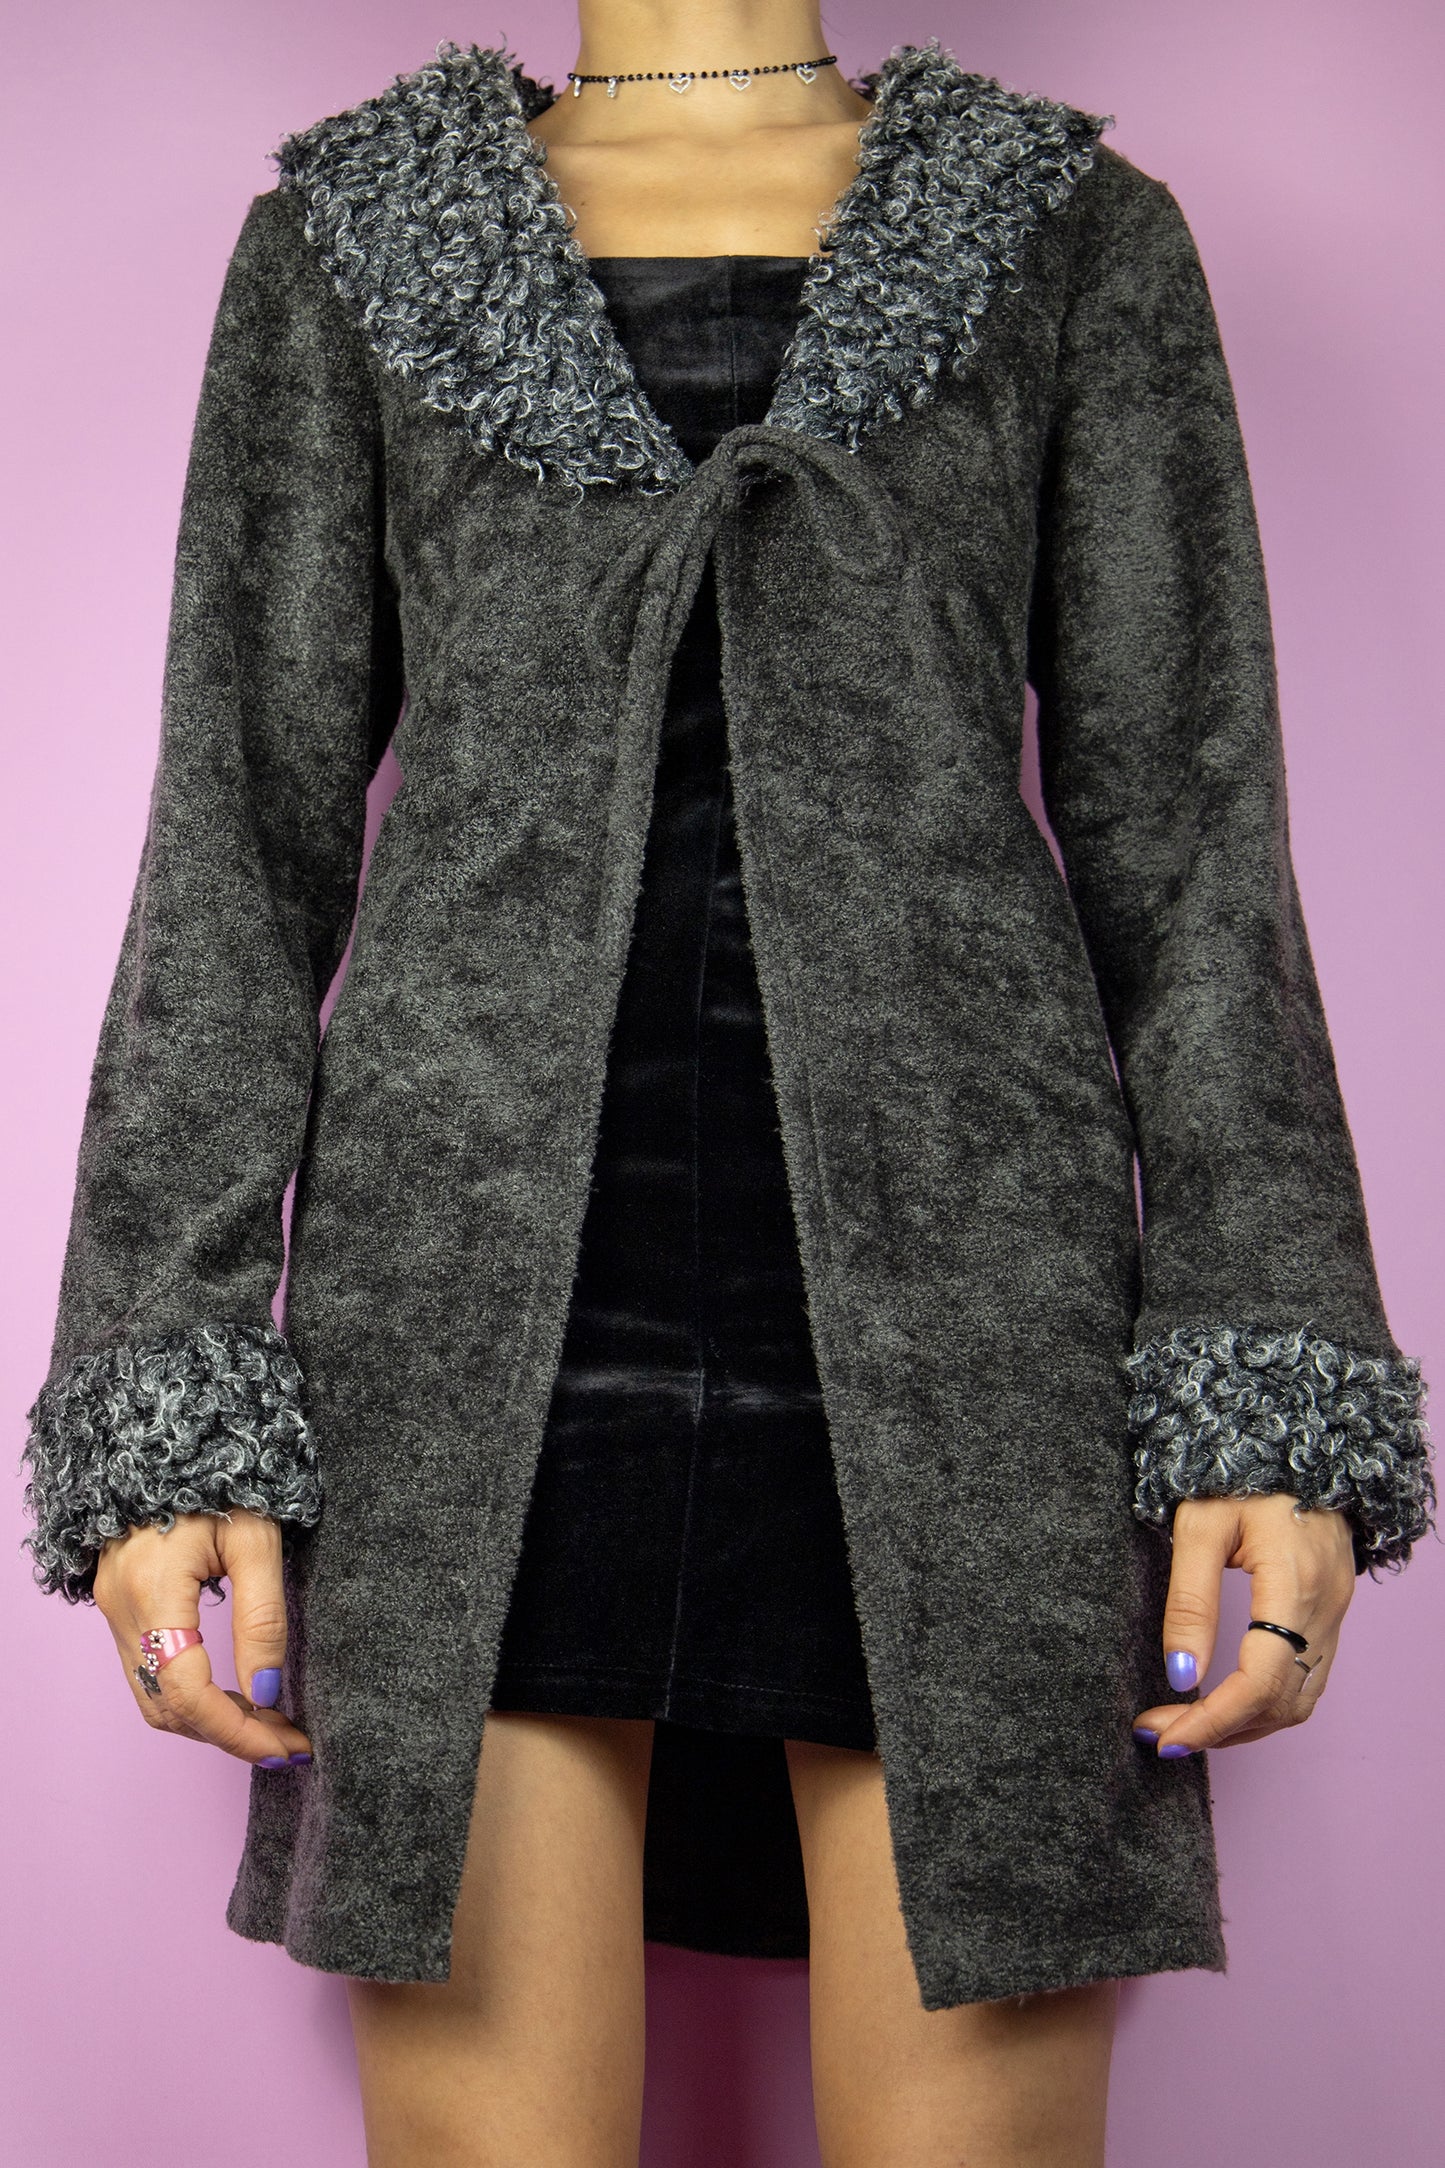 The Vintage Y2K Gray Faux Fur Cardigan is a long gray jacket featuring a faux fur collar and cuffs, fastened with a tie at the front. This iconic duster jacket from the 2000s exudes cyber fashion, and it's a gorgeous statement coat reminiscent of the Penny Lane style.